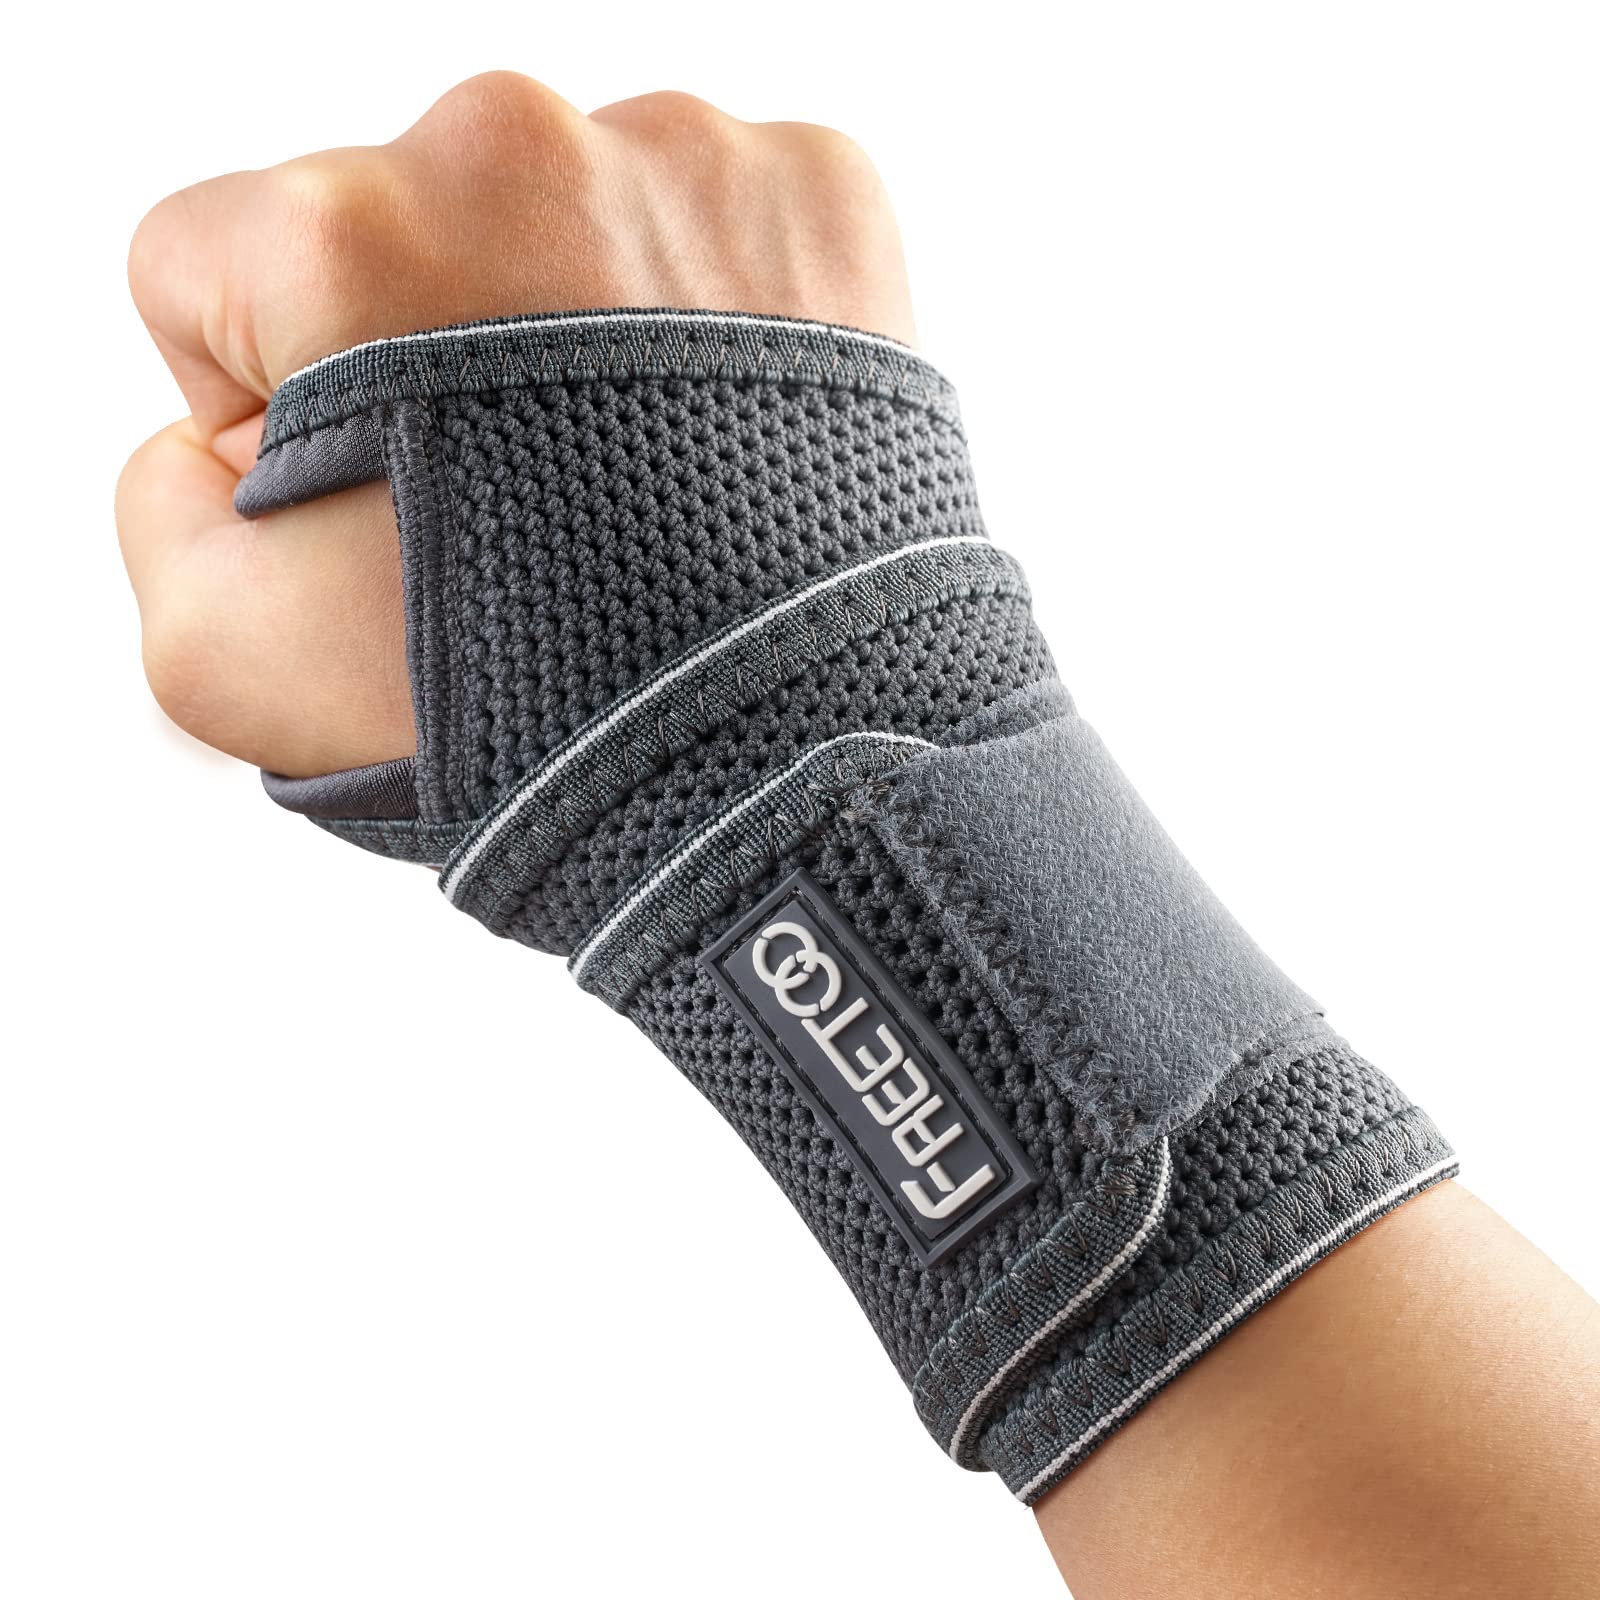 FREETOO 2 Pack Wrist Brace for Carpal Tunnel Relief for Night Support,  Compression Wrist Supports at Work for Women Men, Adjustable Support Wrist  Splint Fit Right Left Hand for Arthritis Tendonitis 2